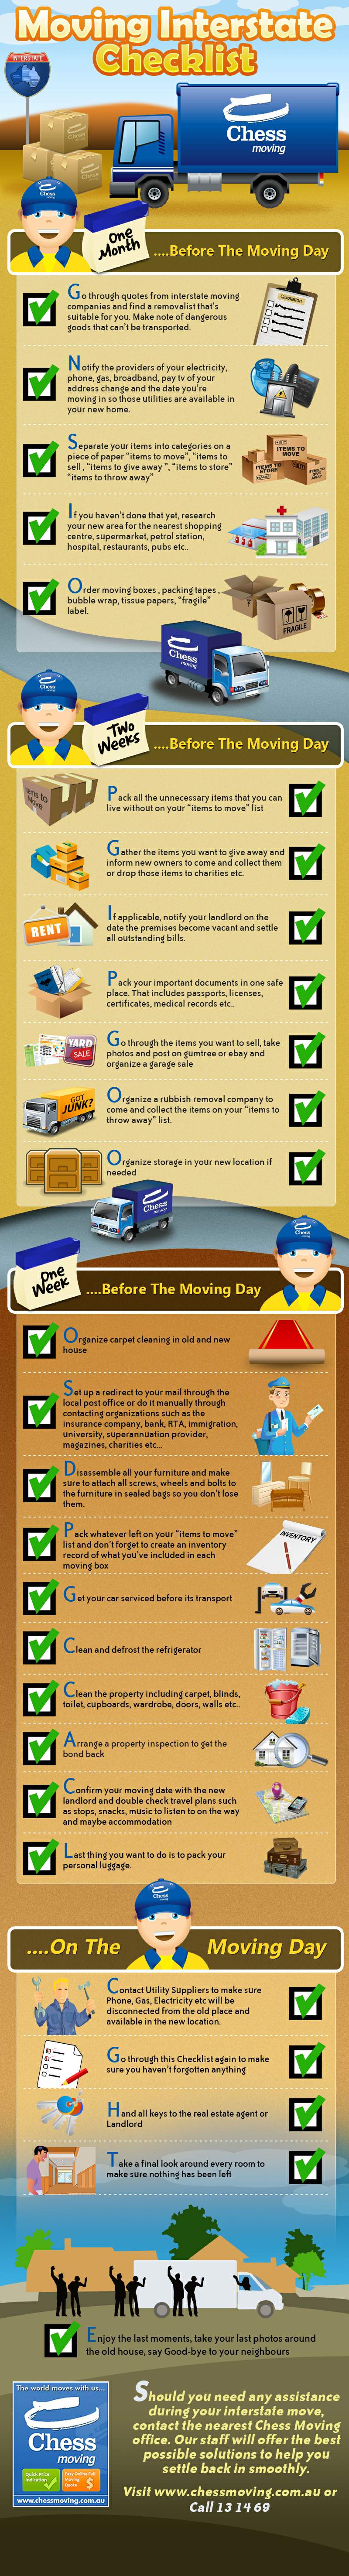 A checklist of items to complete before moving interstate!